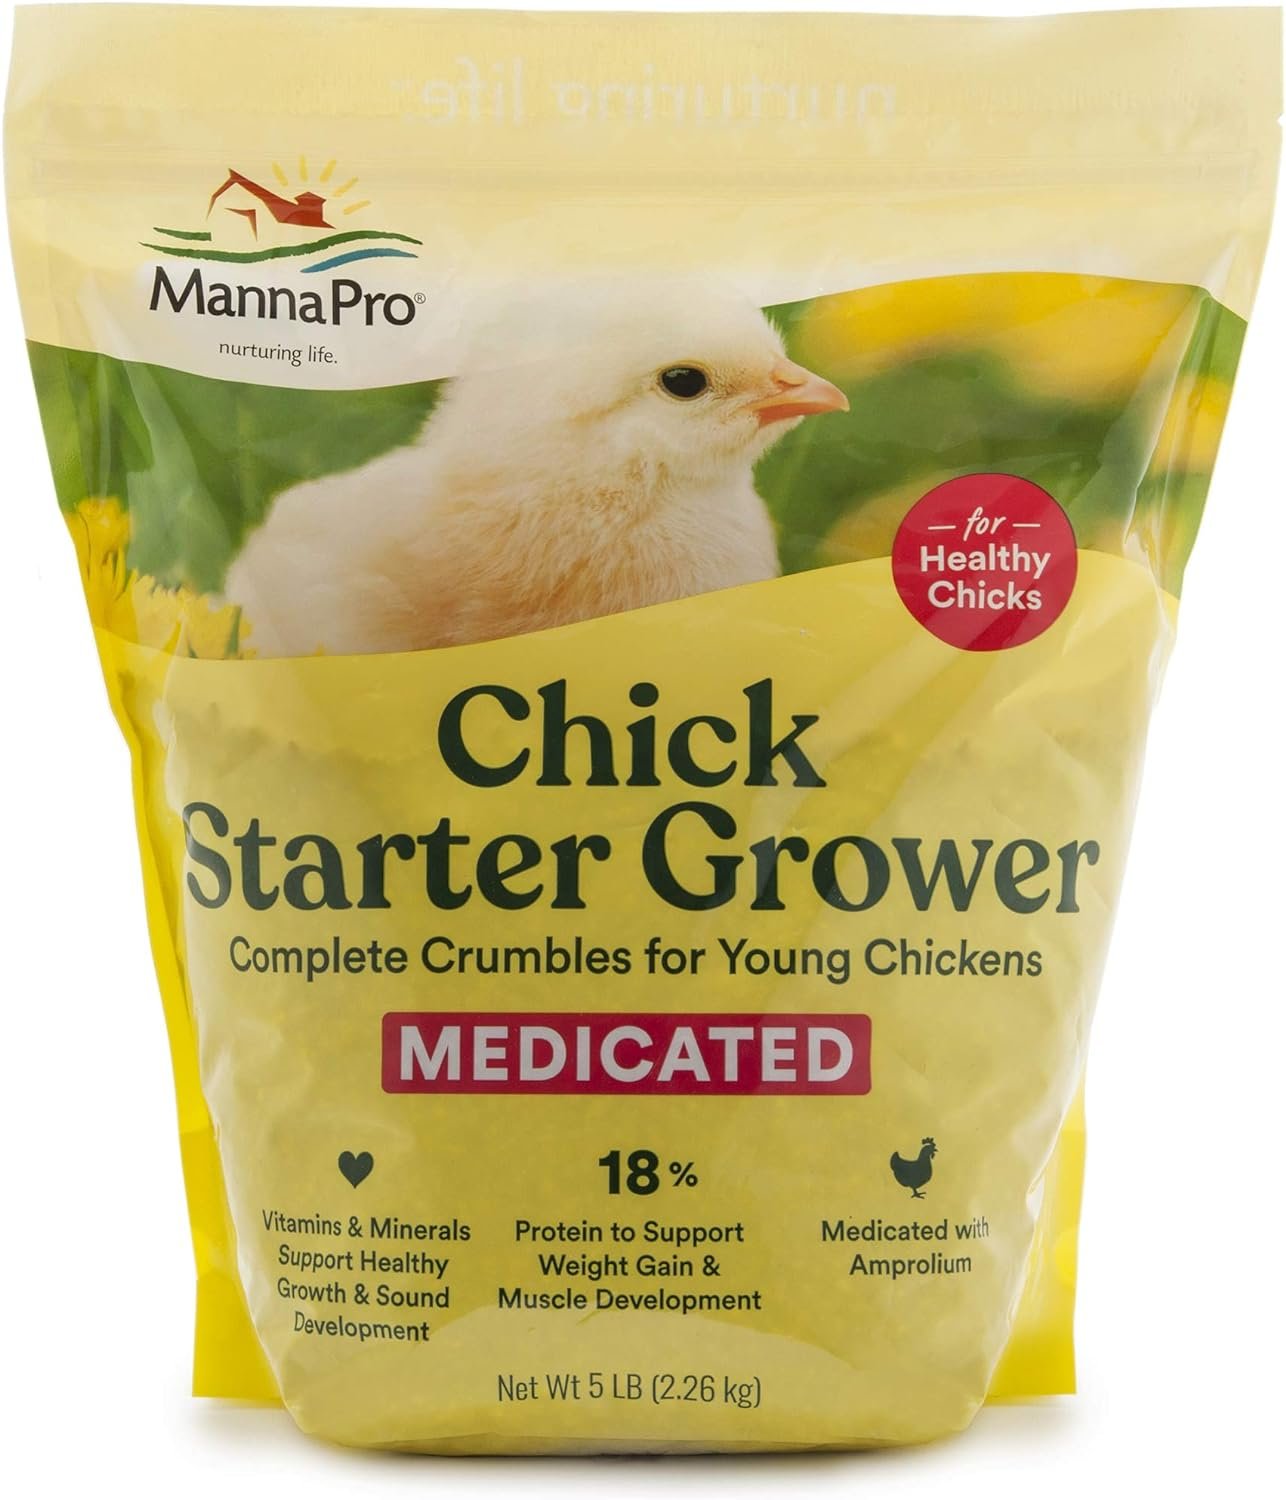 Manna Pro Chick Starter Grower - Medicated Chick Feed Crumble for Young Chickens - Formulated with Amprolium to Prevent Coccidiosis - 5 lbs